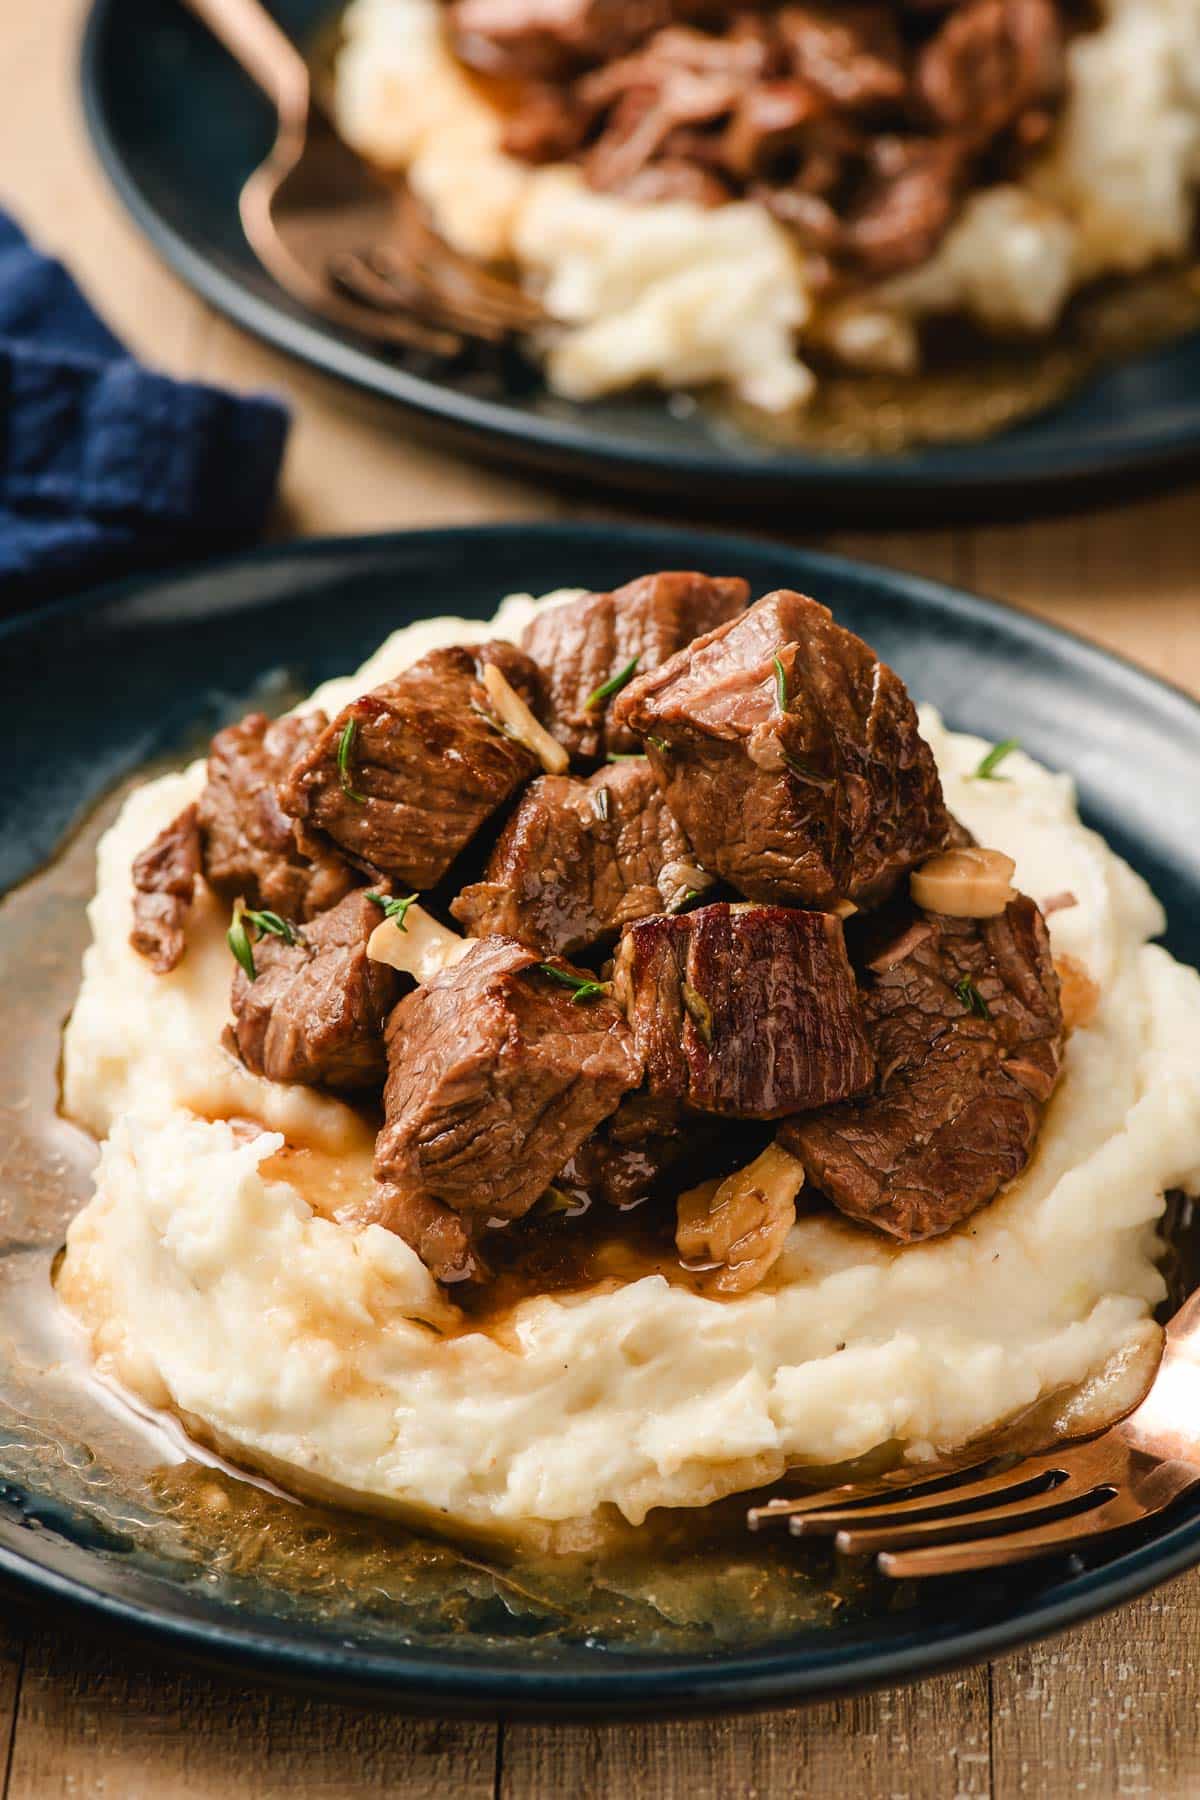 Blue plate stacked with mashed potatoes and slow cooker steak bites.